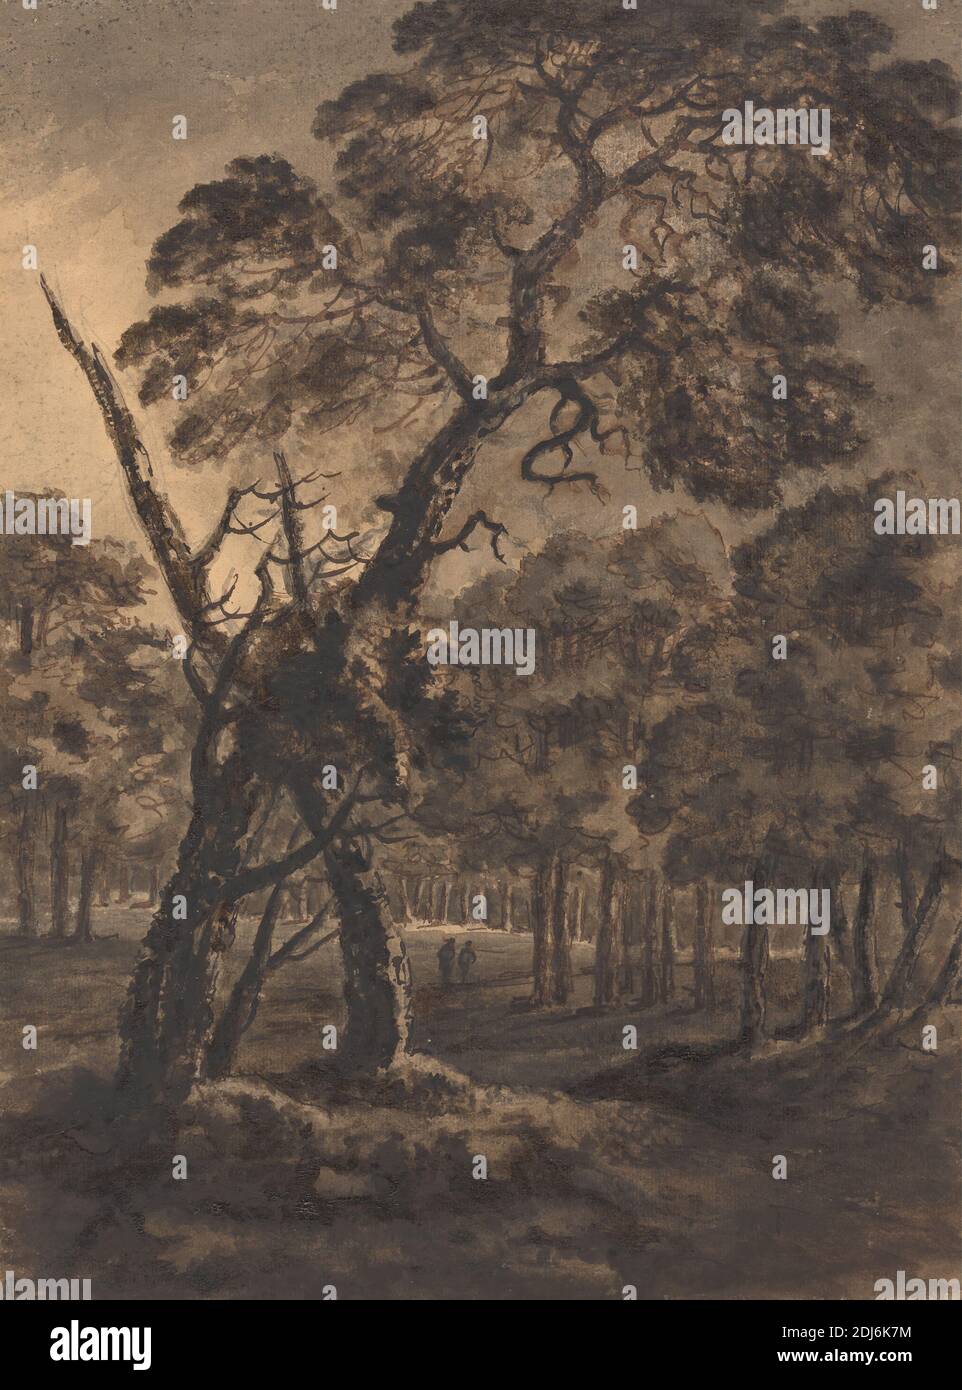 Forest Scene, Rev. William Gilpin, 1724–1804, British, 1771, Gray and brown wash with pen and brown ink over graphite with gum on moderately thick, moderately textured, cream wove paper prepared with brown wash, mounted on thick, slightly textured, cream wove paper, Mount: 20 13/16 x 15 7/8 inches (52.9 x 40.3 cm) and Sheet: 17 1/8 x 12 7/8 inches (43.5 x 32.7 cm), dark, figures, forest, landscape, night, path, trees, walking Stock Photo